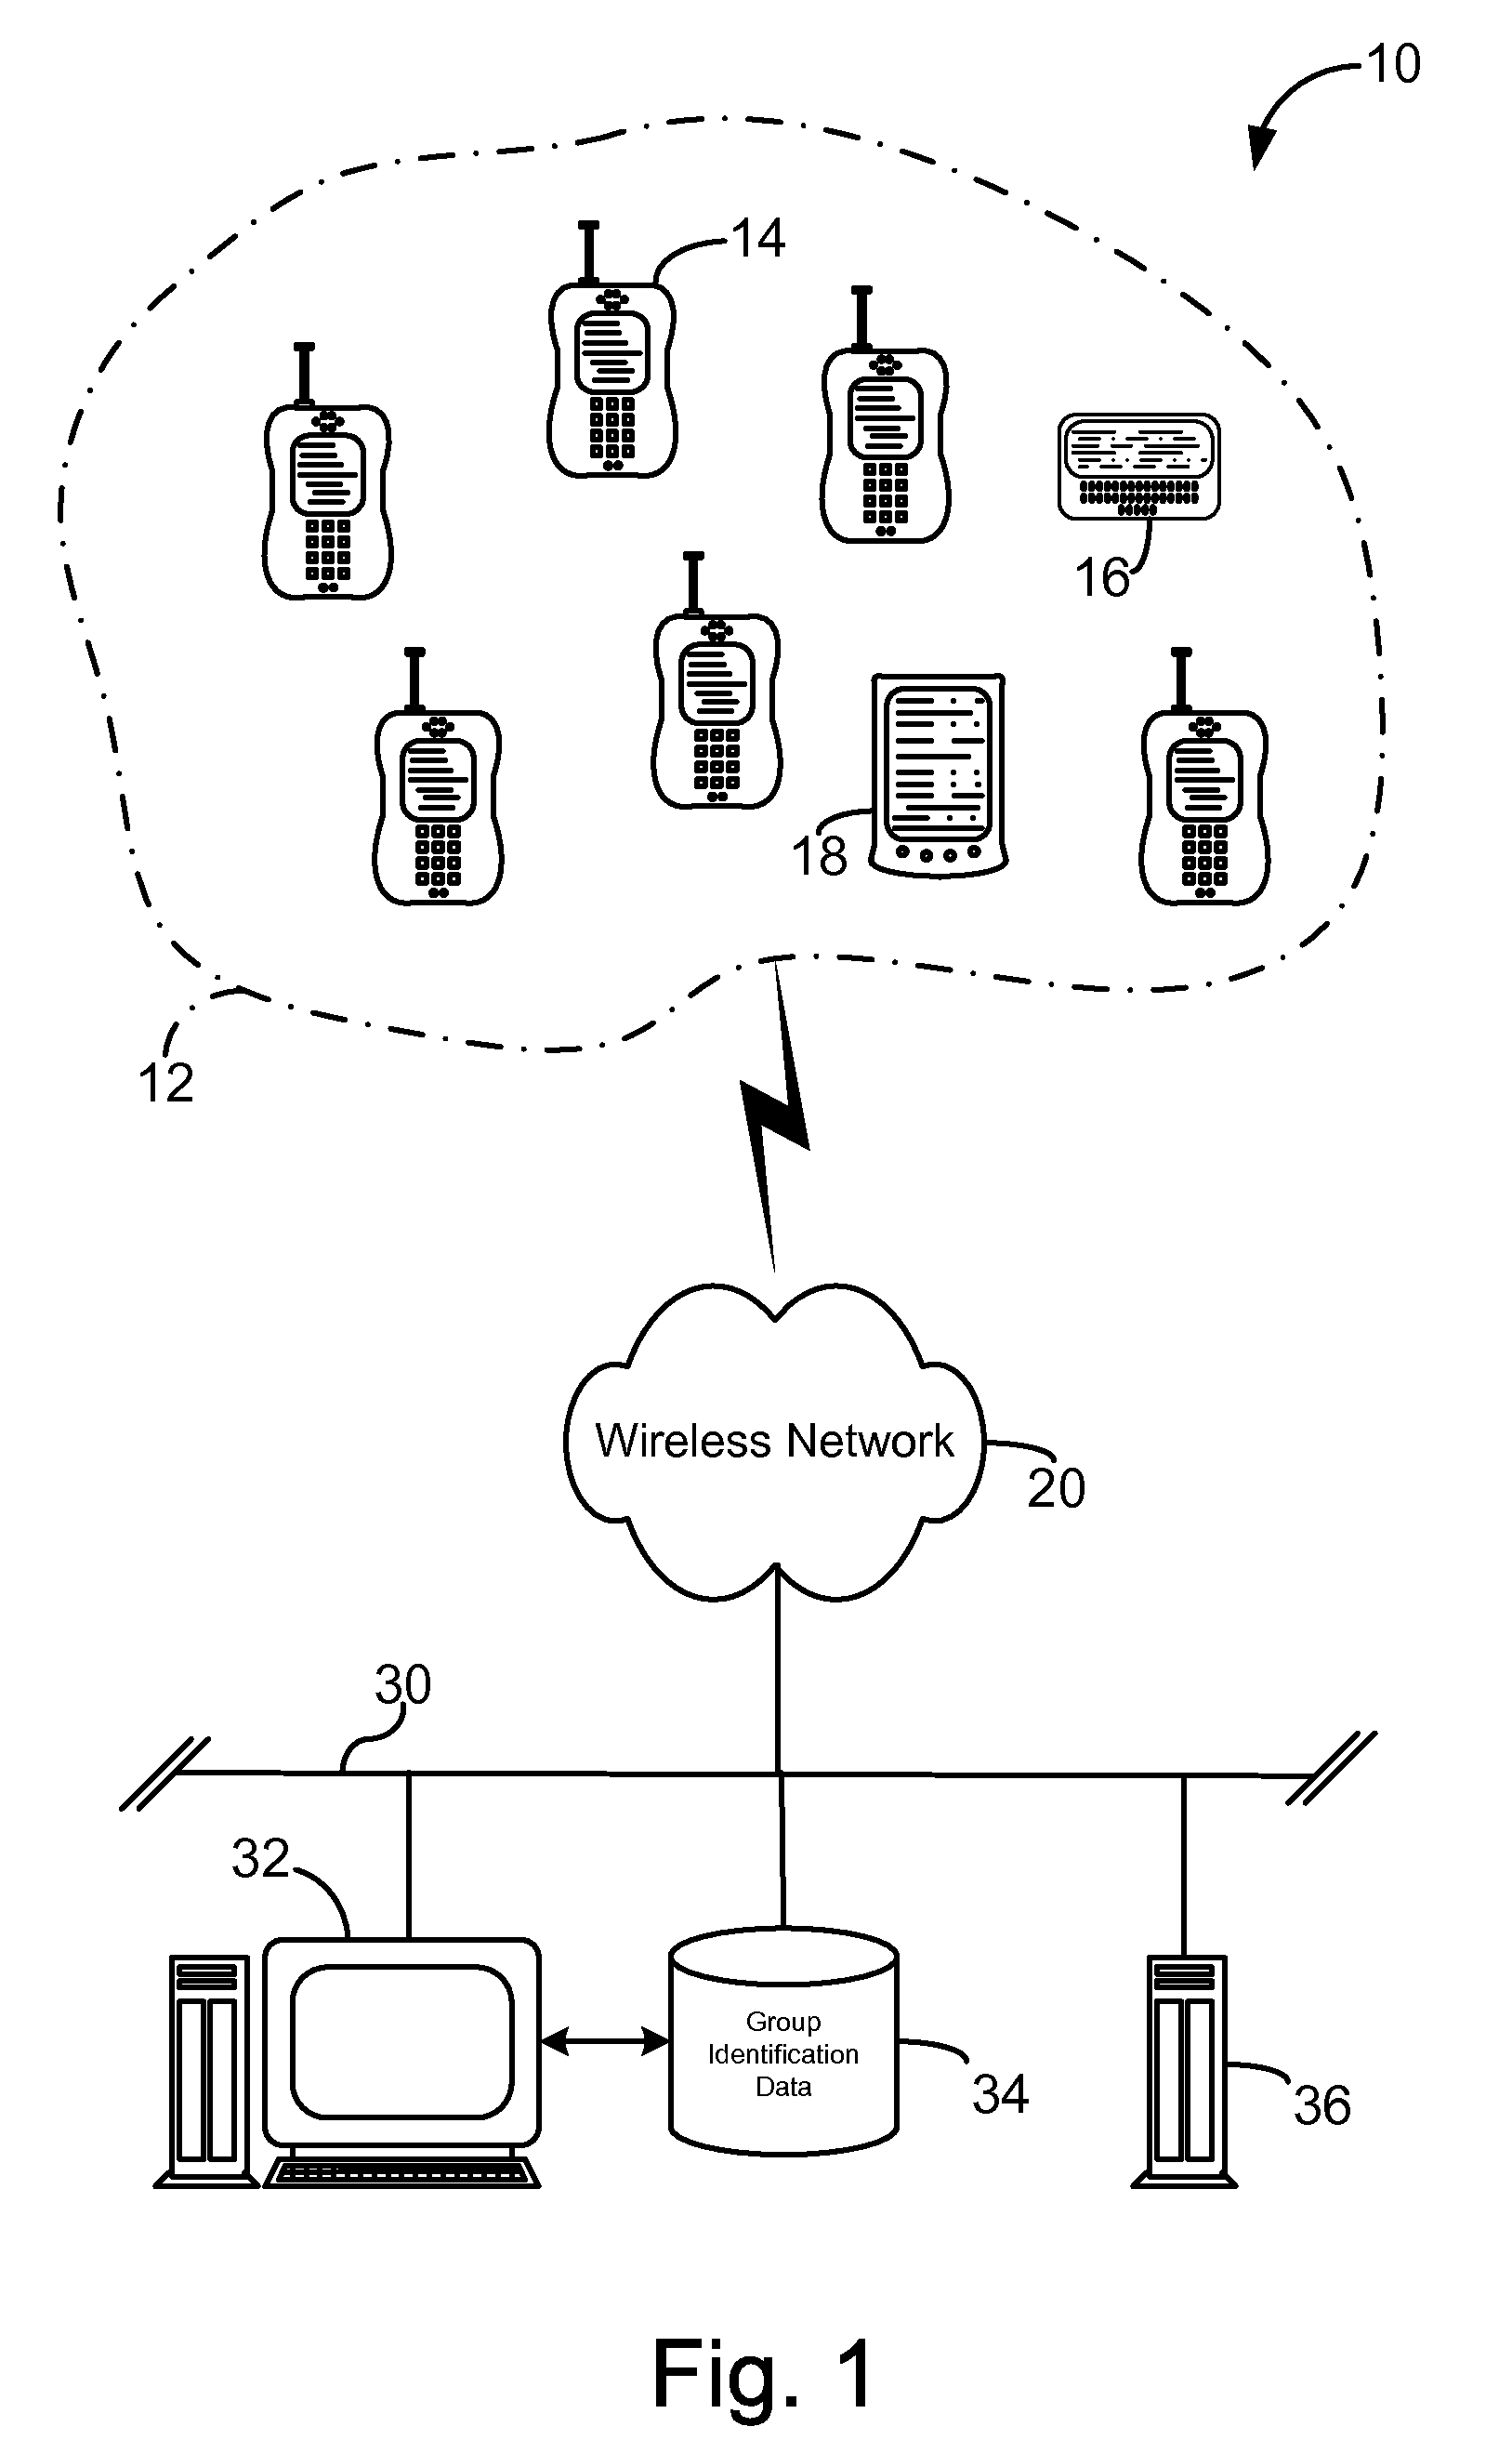 Prioritization of group communications at a wireless communication device